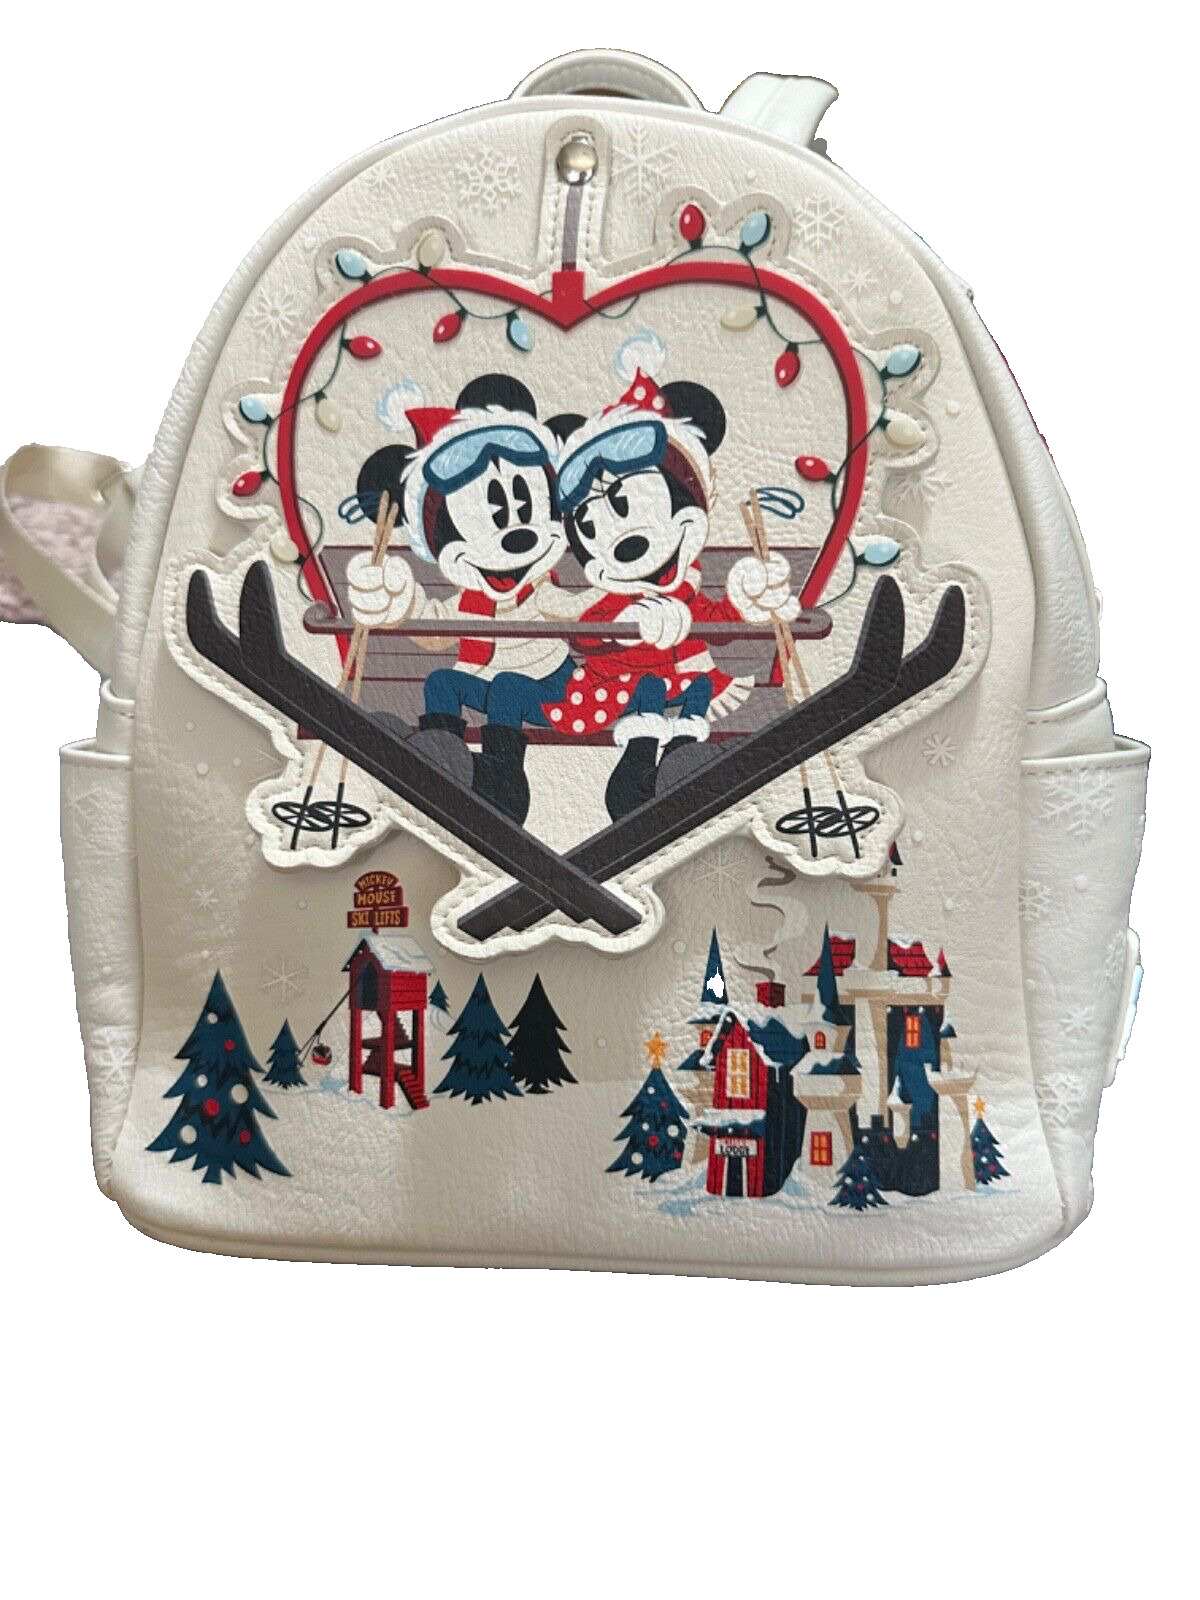 Disney Loungefly Mickey & Minnie Mouse Christmas Holiday Mini Backpack 2021